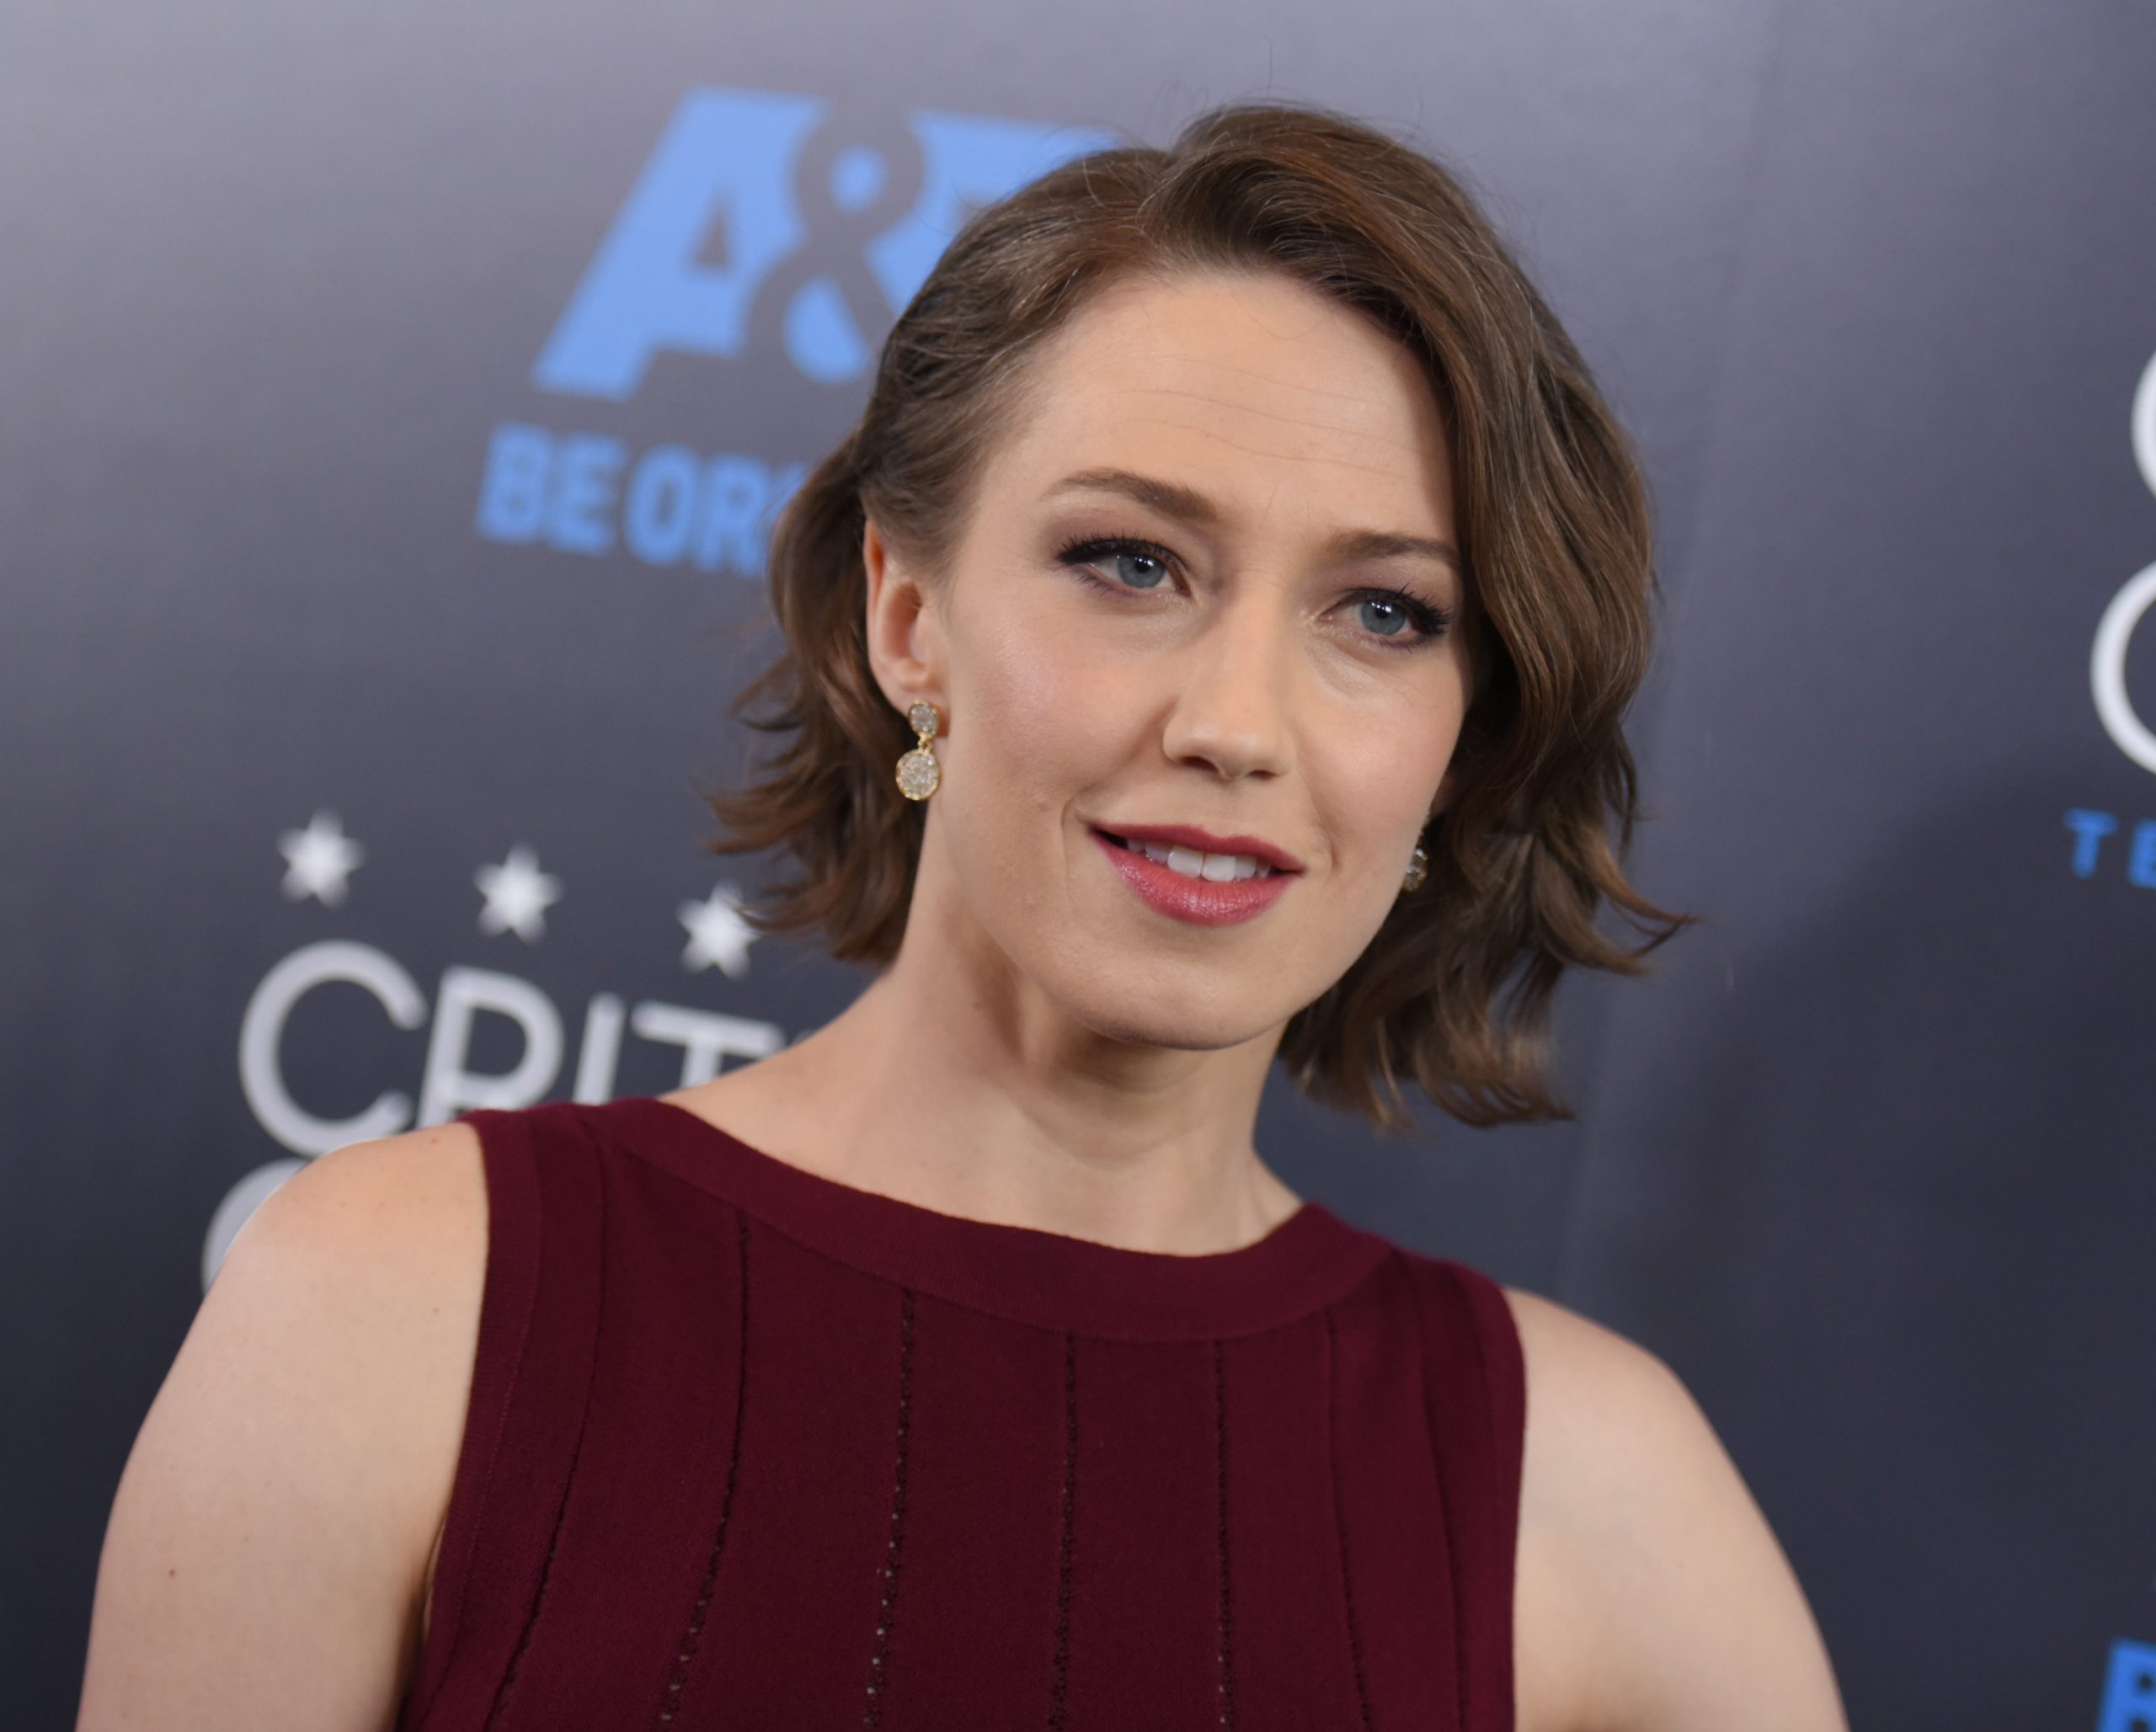 Carrie Coon's Measurements: Bra Size, Height, Weight and More - Famous...